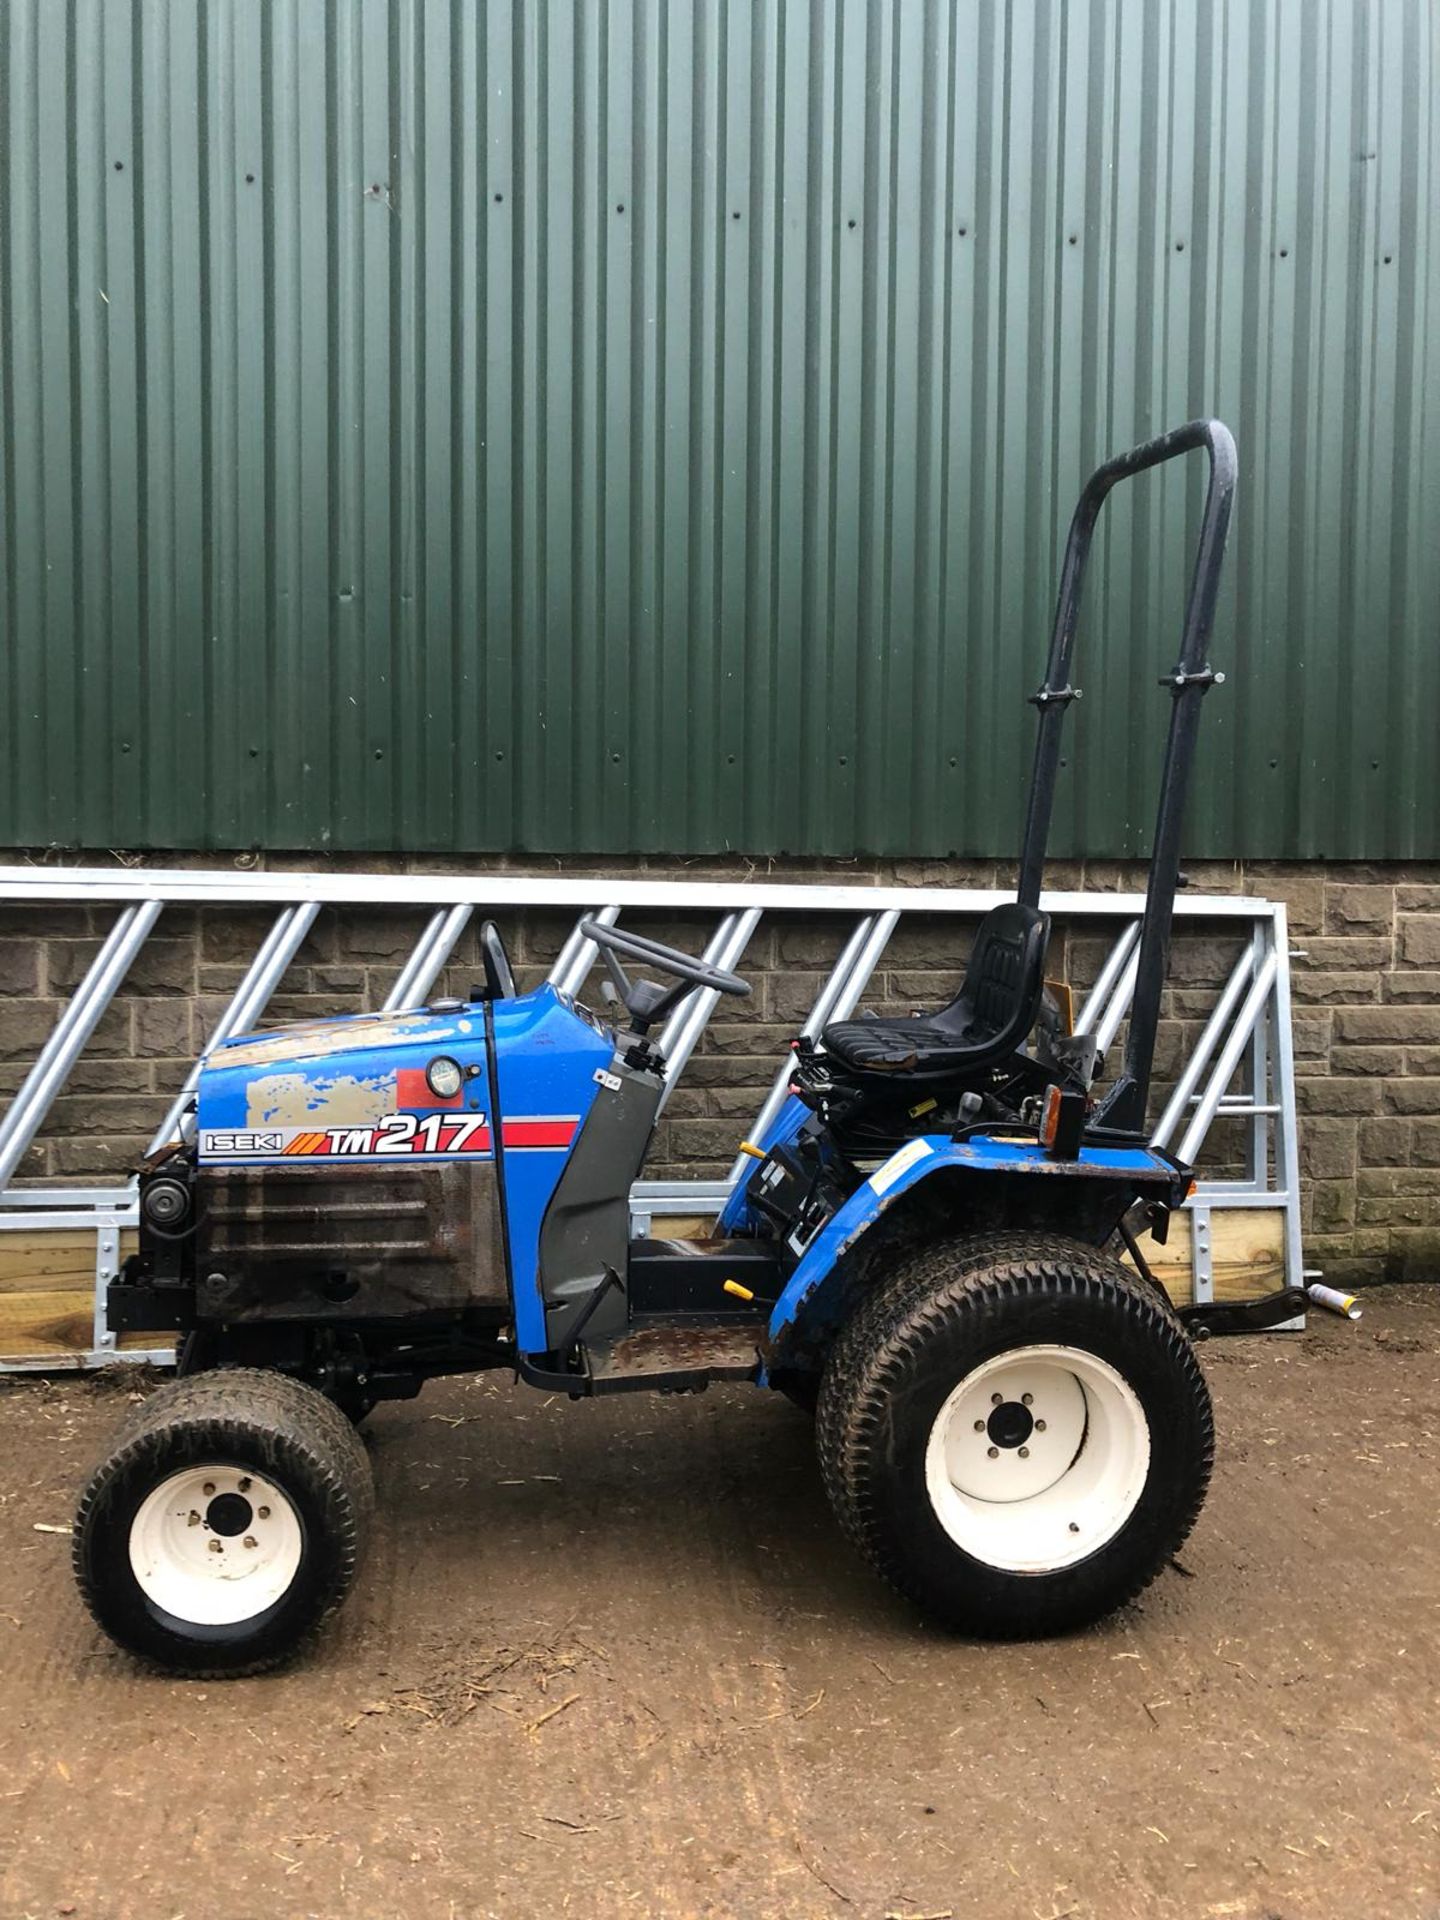 2000 ISEKI TM217 BLUE DIESEL COMPACT UTILITY TRACTOR WITH ROLL BAR, 3 POINT LINKAGE ETC *PLUS VAT* - Image 2 of 16